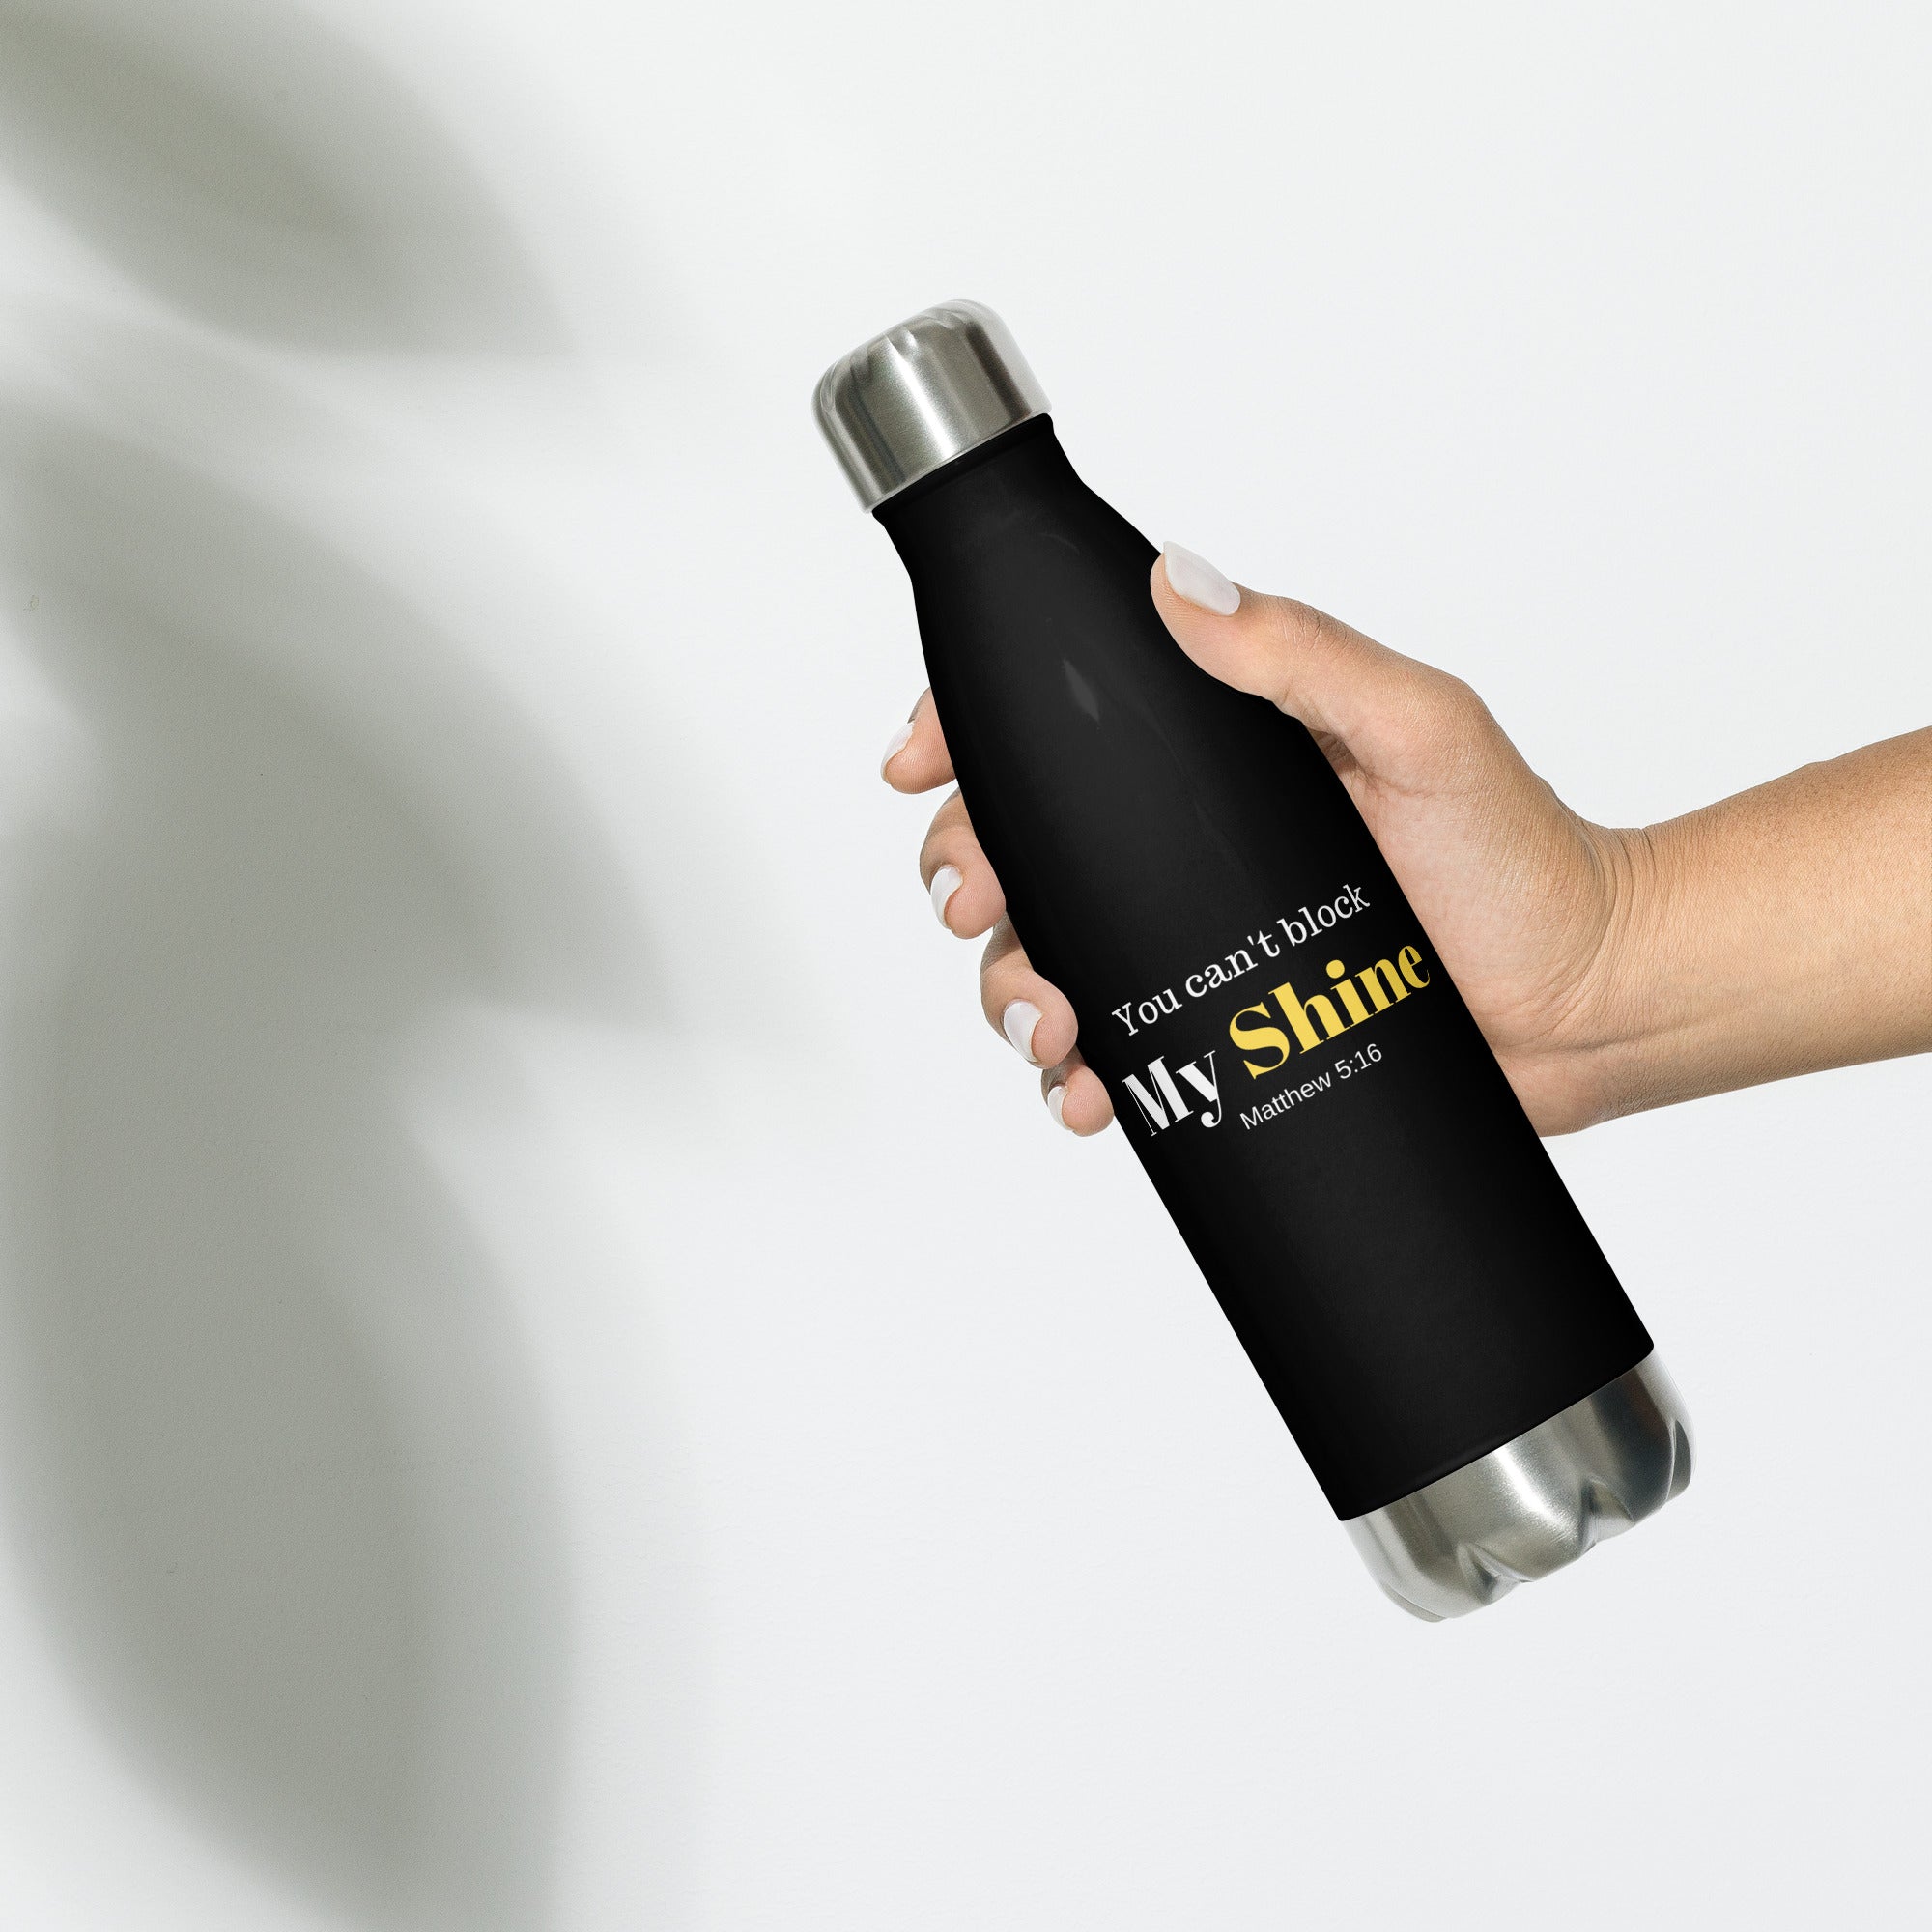 You Can't Block My Shine - Stainless Steel Water Bottle